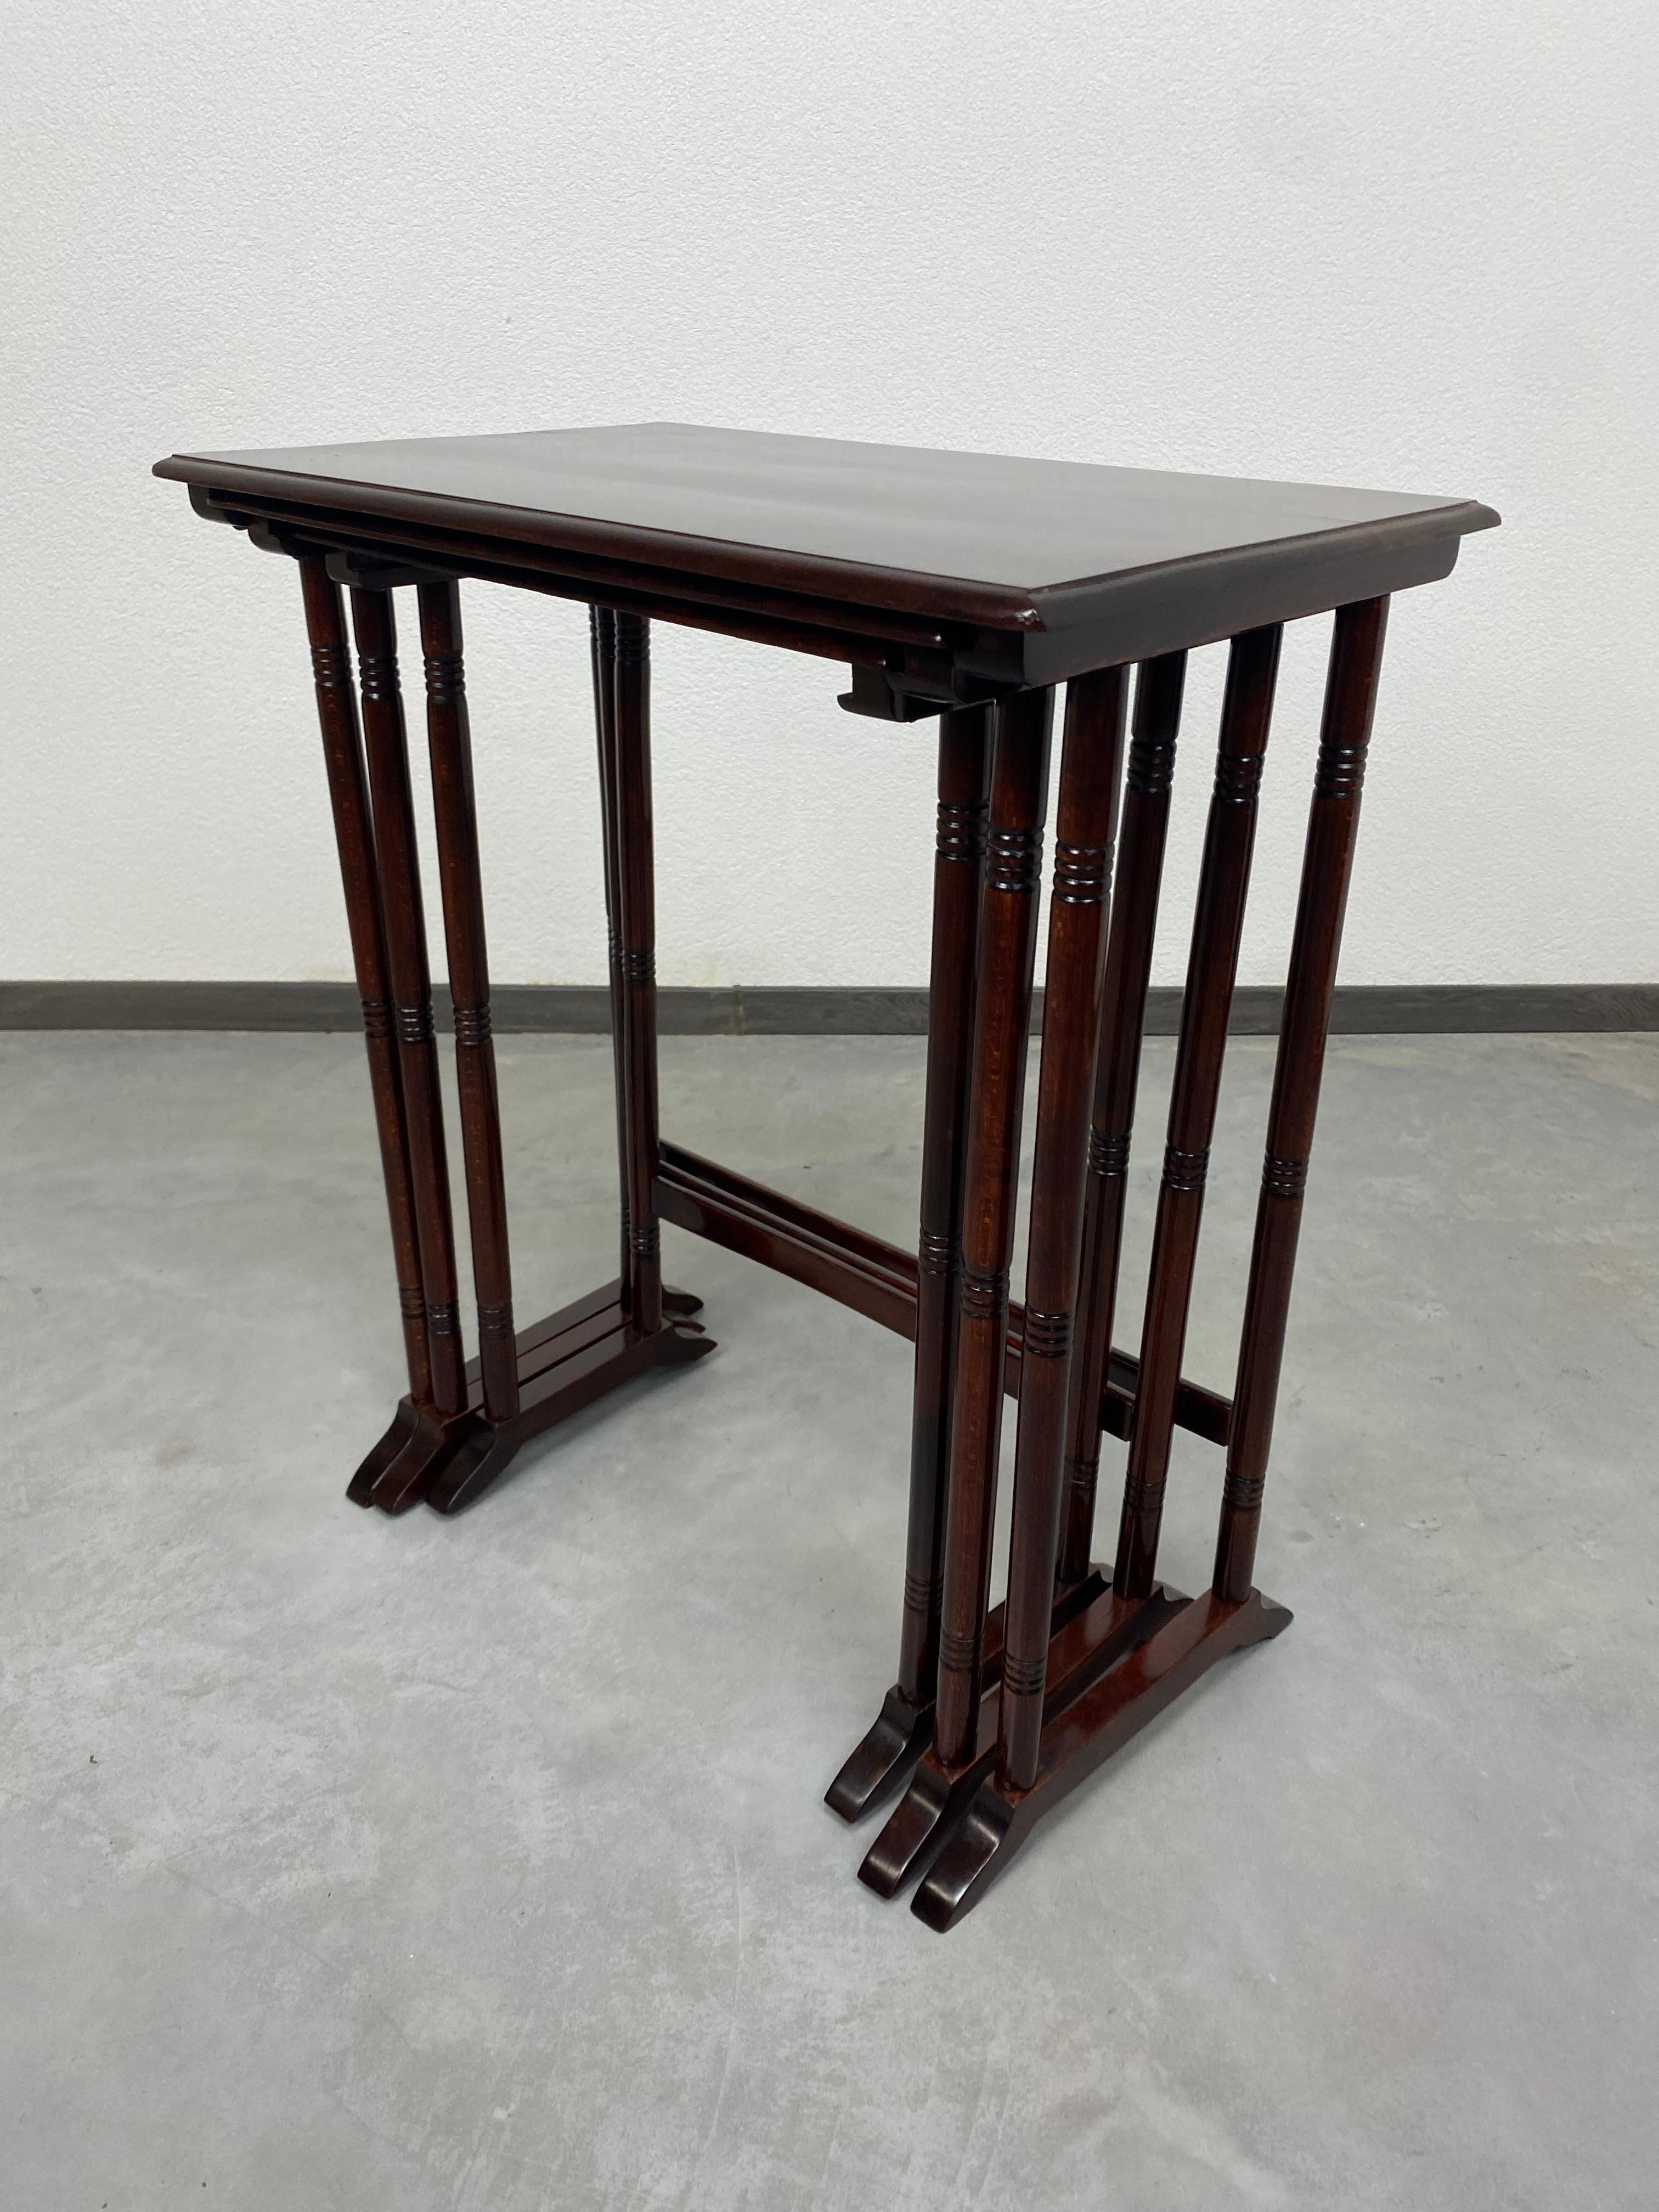 Secession nesting tables by Thonet professionally stained and repolished.
Measures: 1. table 31 x 45 x 69cm 2. table 34,5 x 53 x 70cm 3. table 39 x 60,5 x 72cm.
  